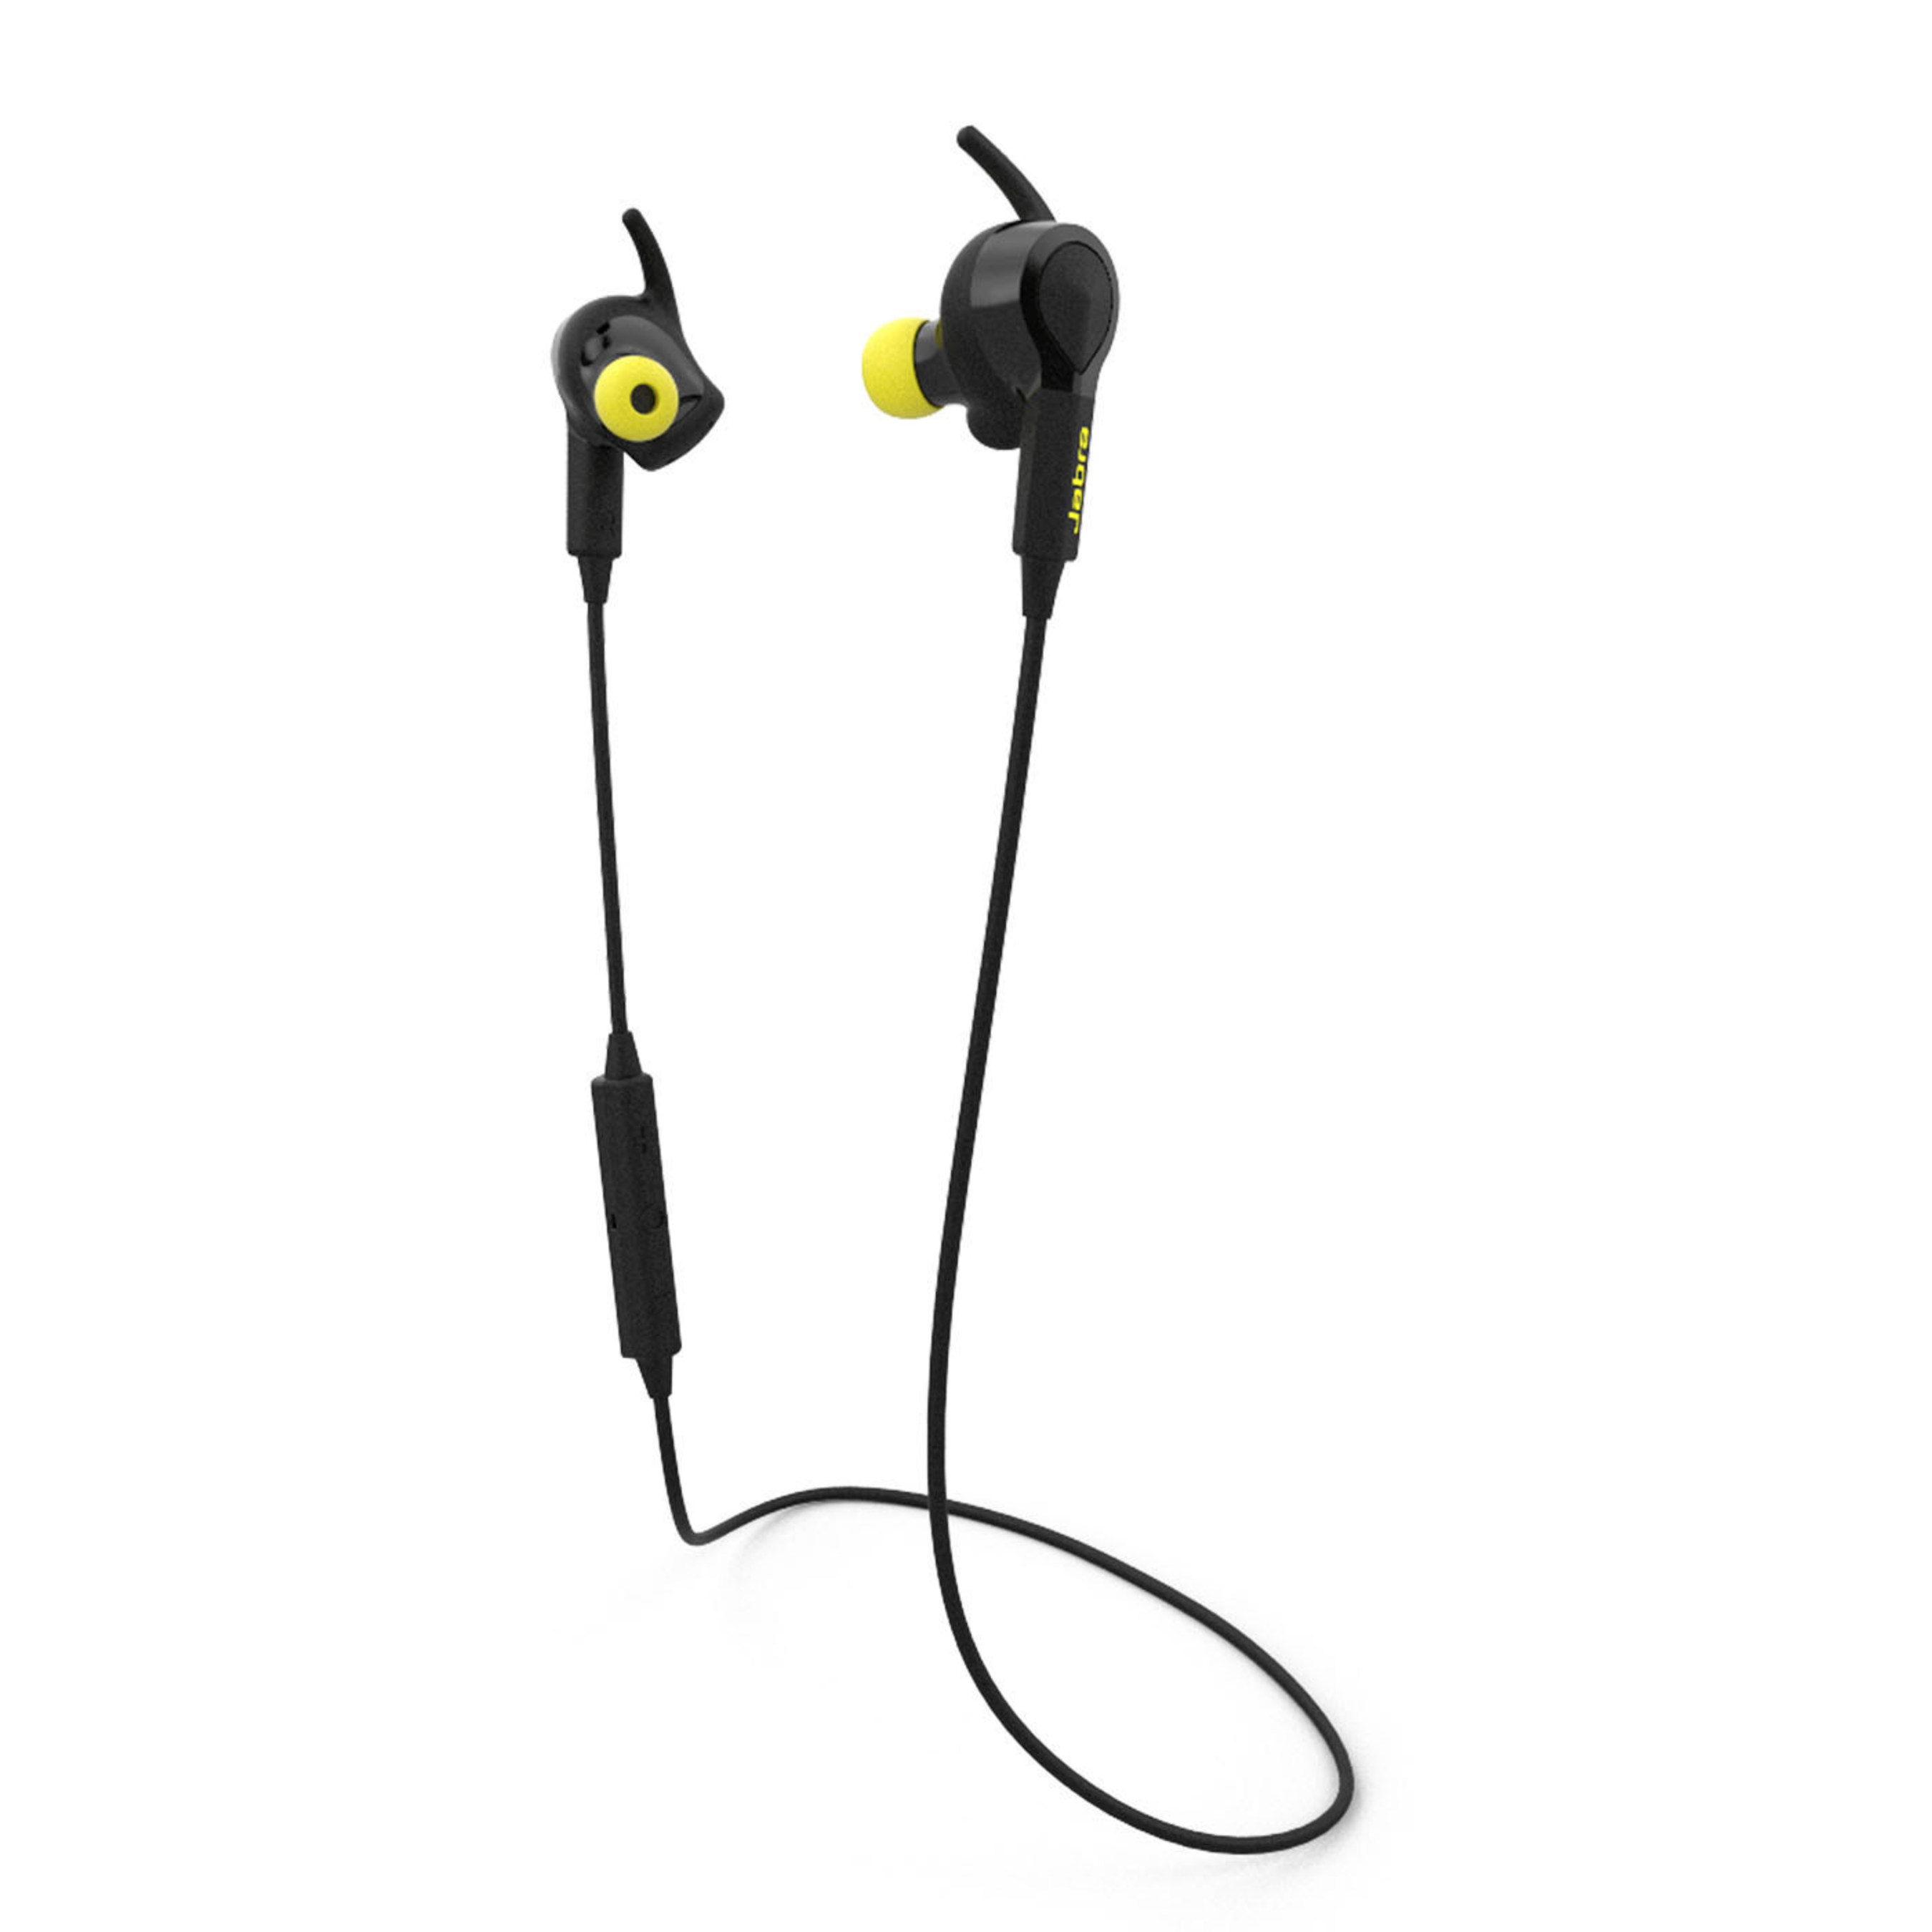 Jabra Sport Pulse Wireless is the world’s first stereo earbuds with built-in heart rate monitor and Sport Life App. (PRNewsFoto/Jabra)